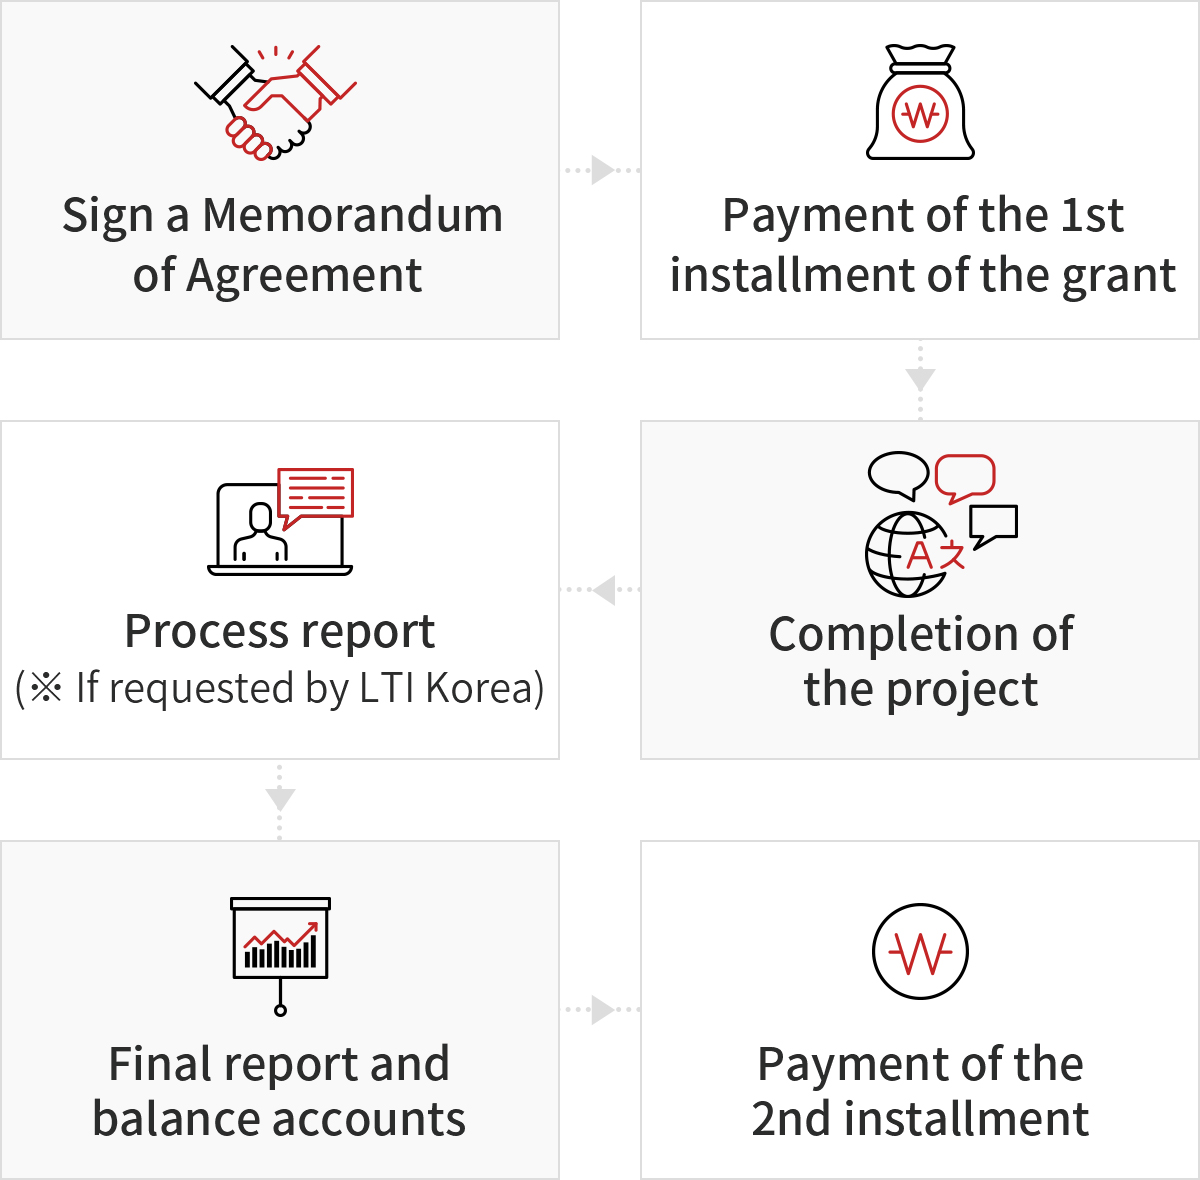 1) Signing of international exchange grant contract > 2) First grant payment > 3) Project carried out > 4) Process report  (if requested by LTI Korea) > 5) Final report and expenses calculation > 6) Second grant payment